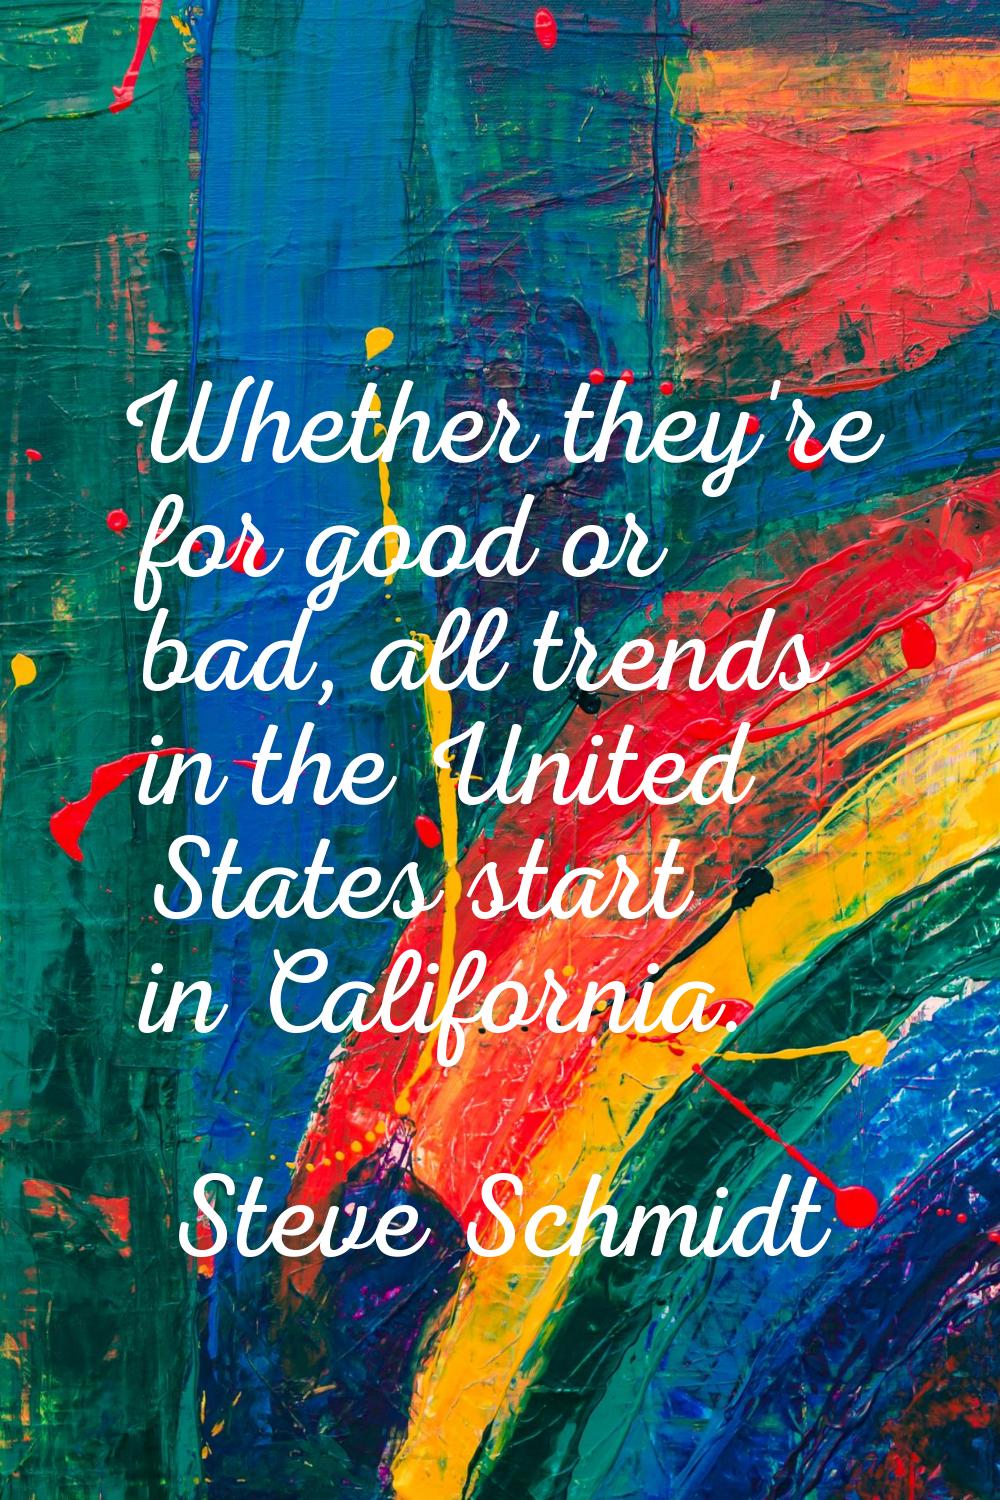 Whether they're for good or bad, all trends in the United States start in California.